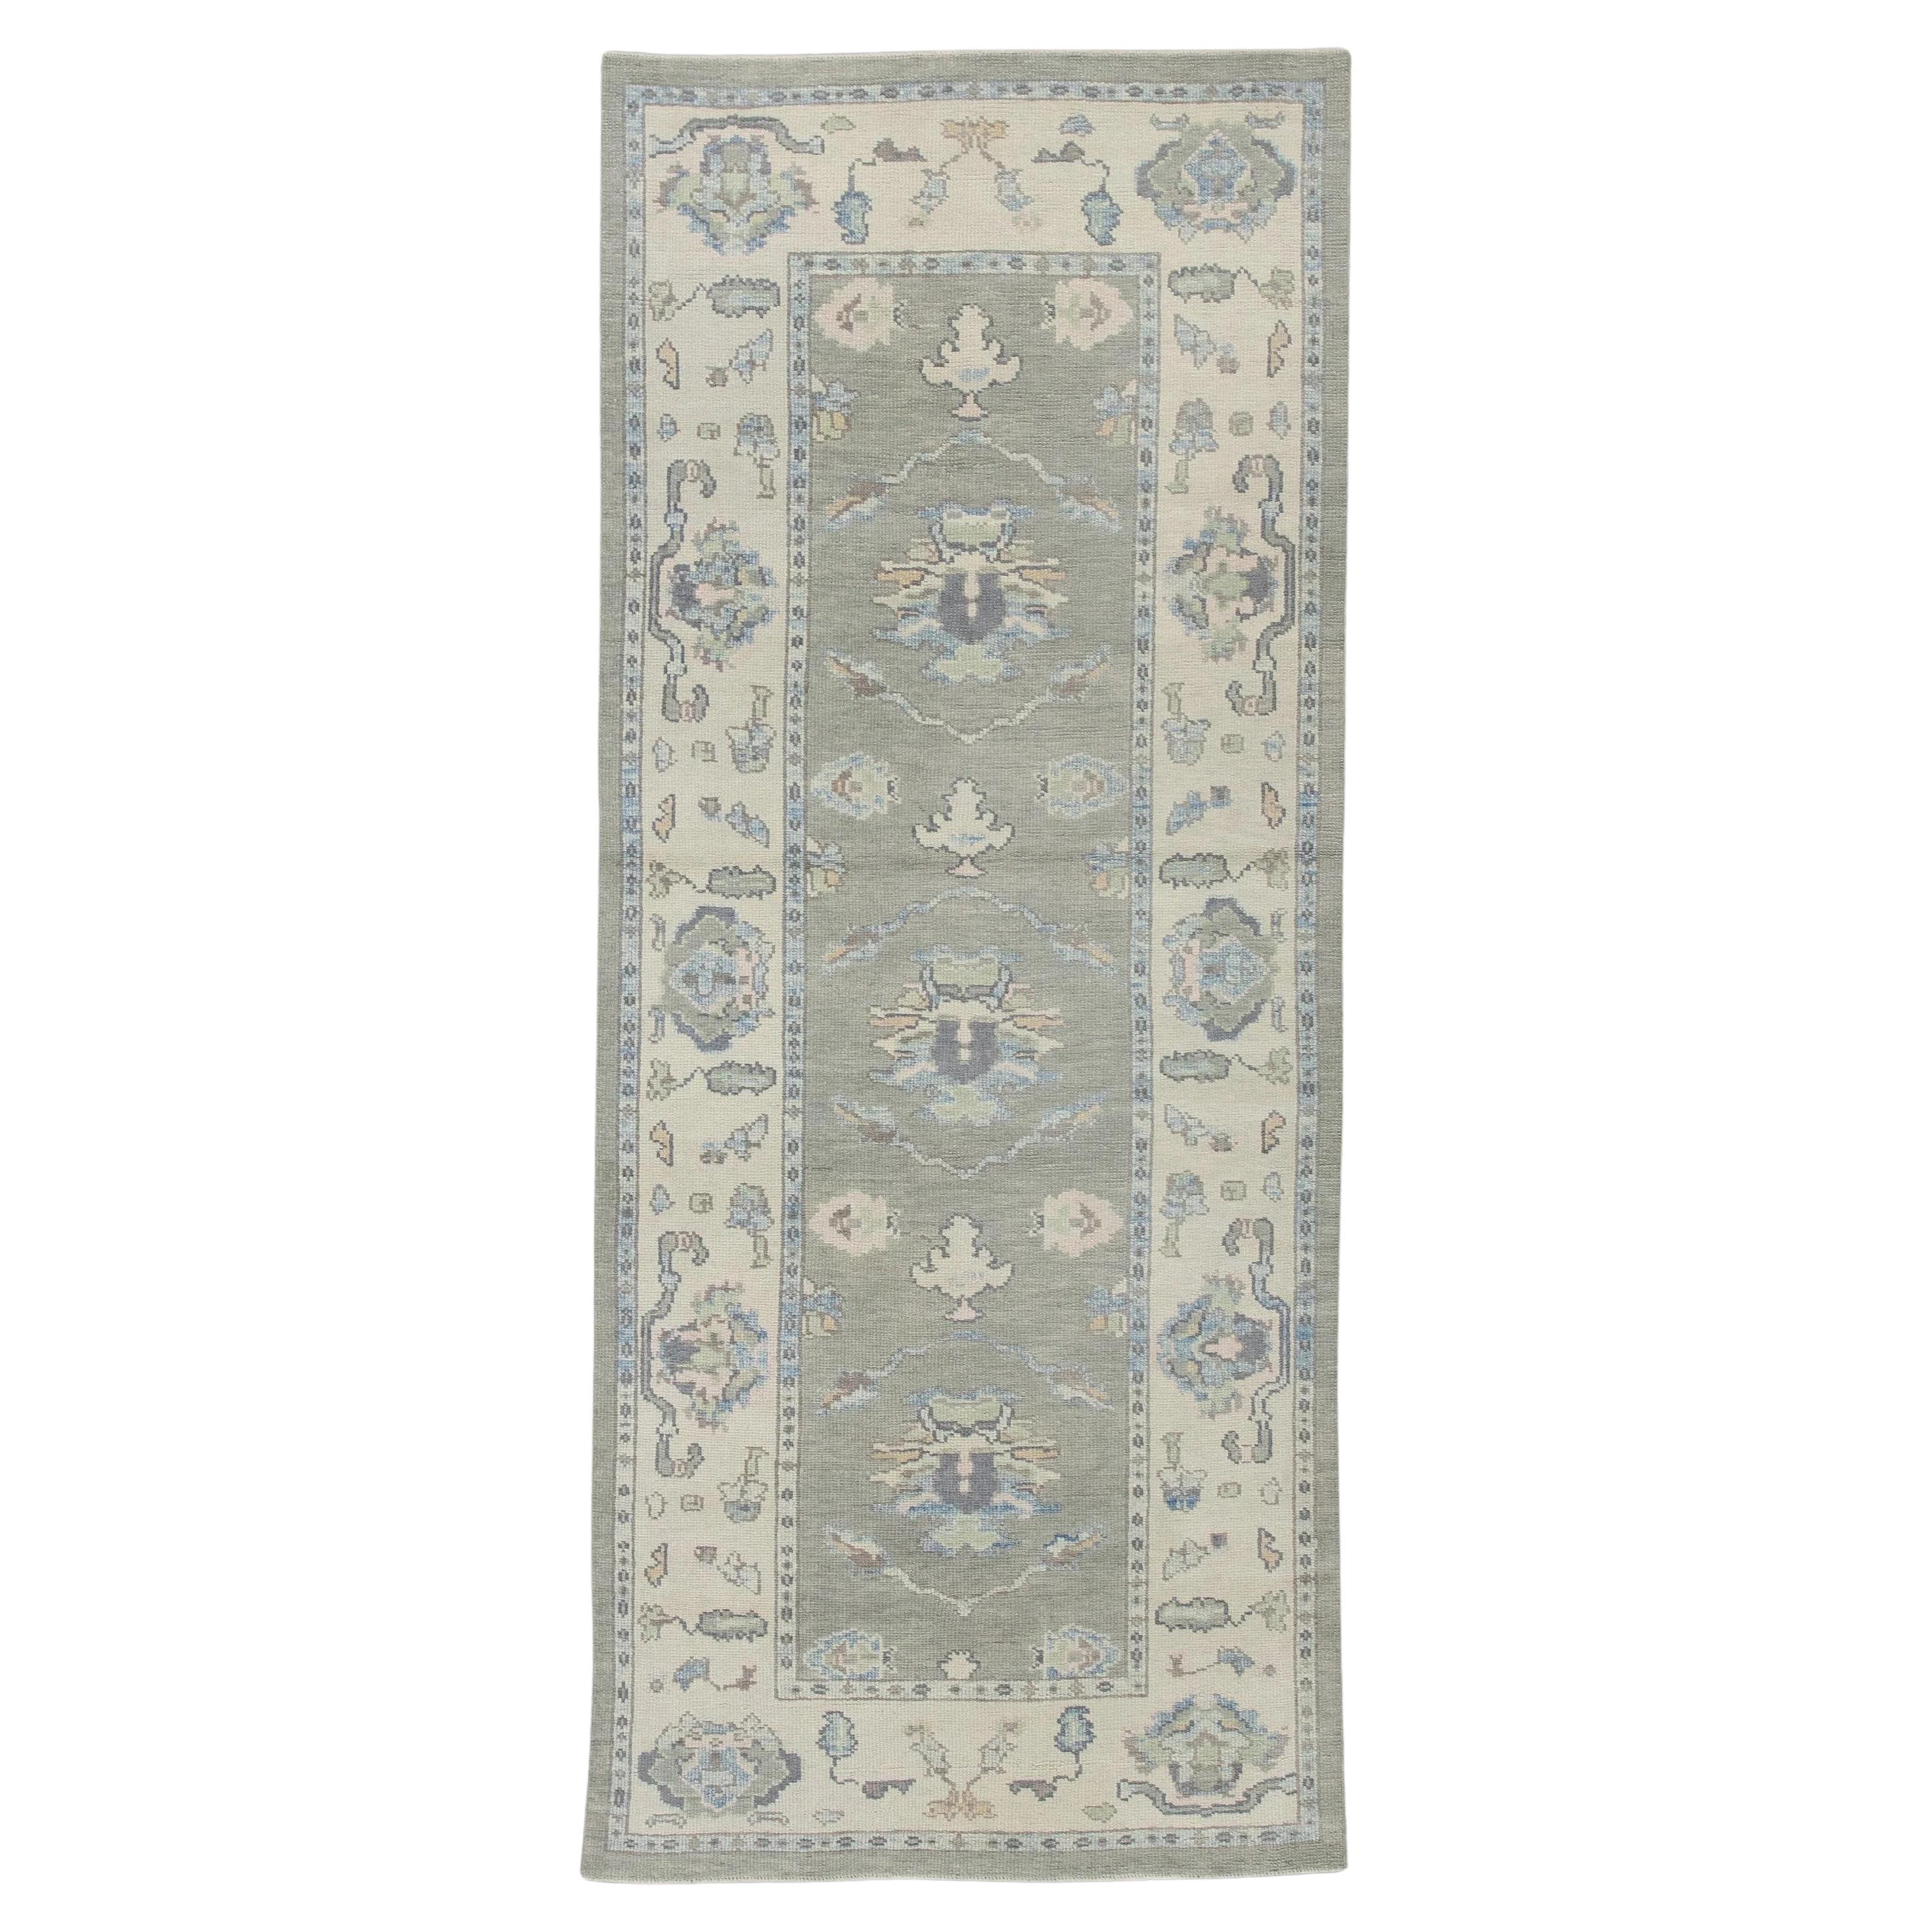 Green Floral Handwoven Wool Turkish Oushak Rug 3'11" x 9'7" For Sale